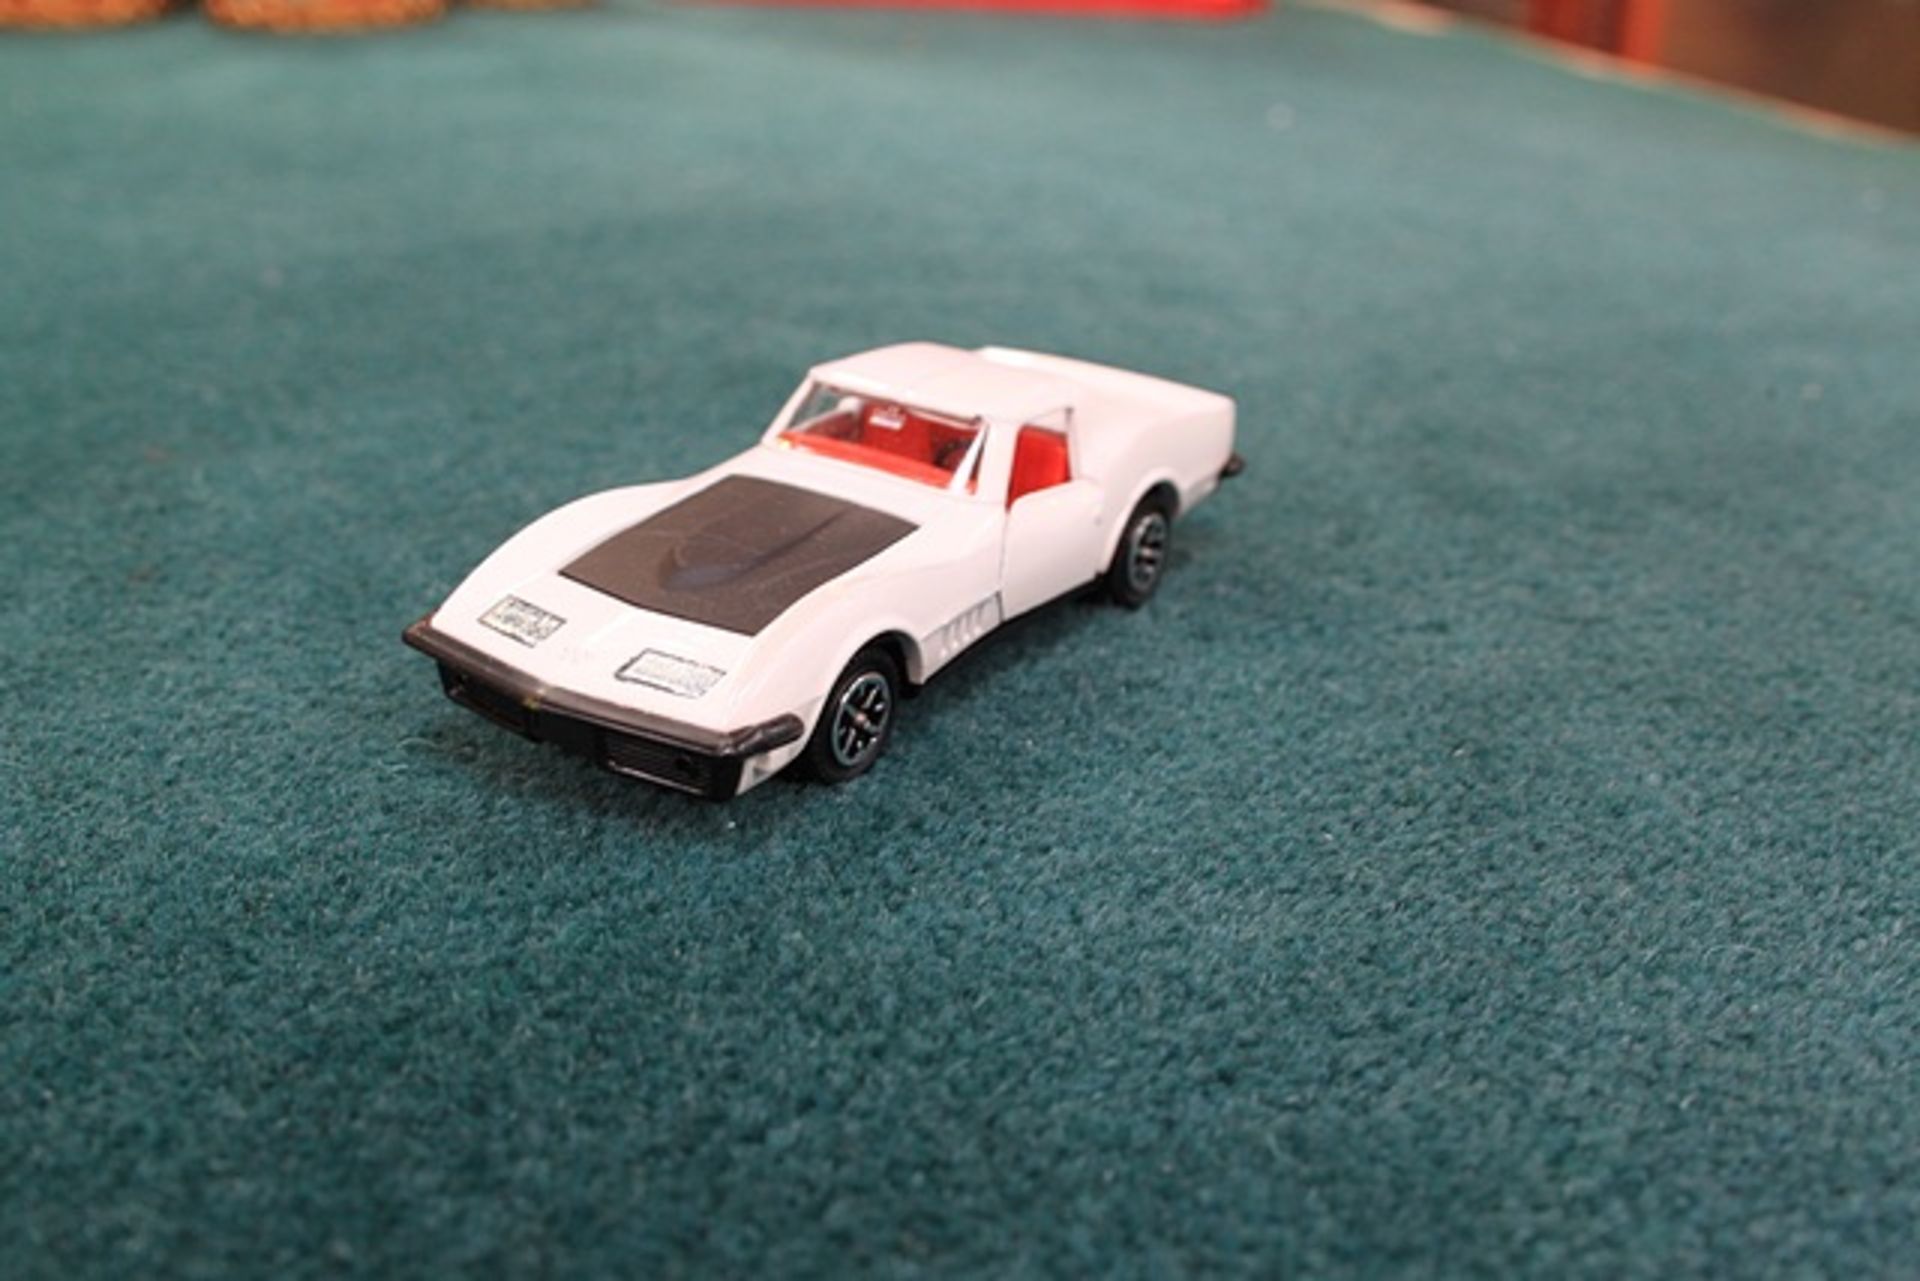 Dinky Toys Diecast # 221 Corvette Stingray In White With Red Interior And Black Bonnet Complete With - Image 3 of 3